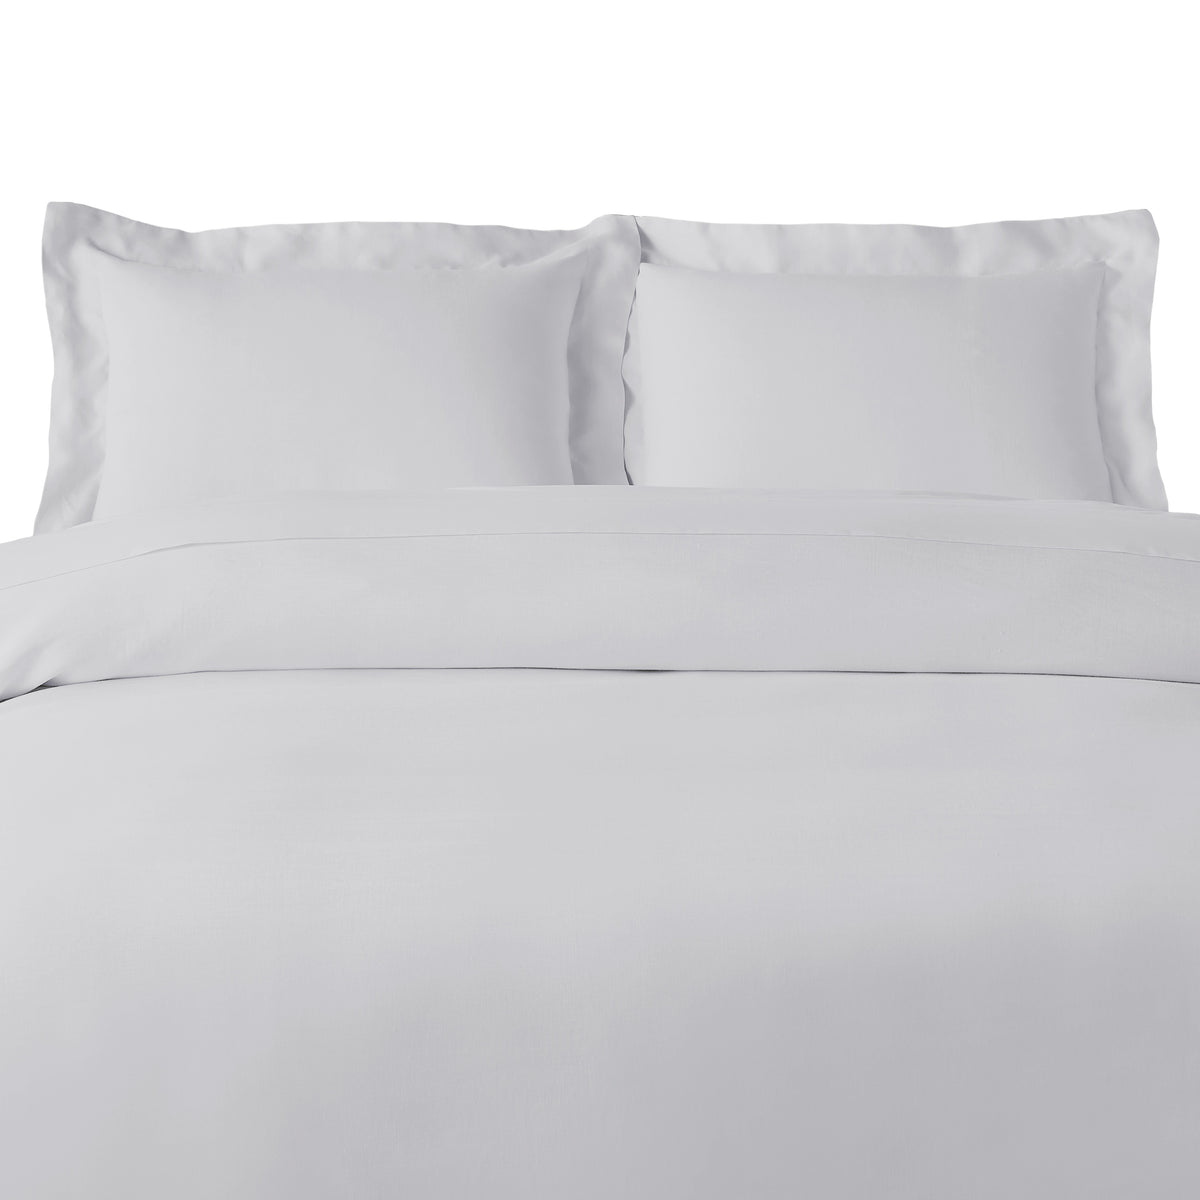 100% Rayon From Bamboo 300 Thread Count Solid Duvet Cover Set - Platinum